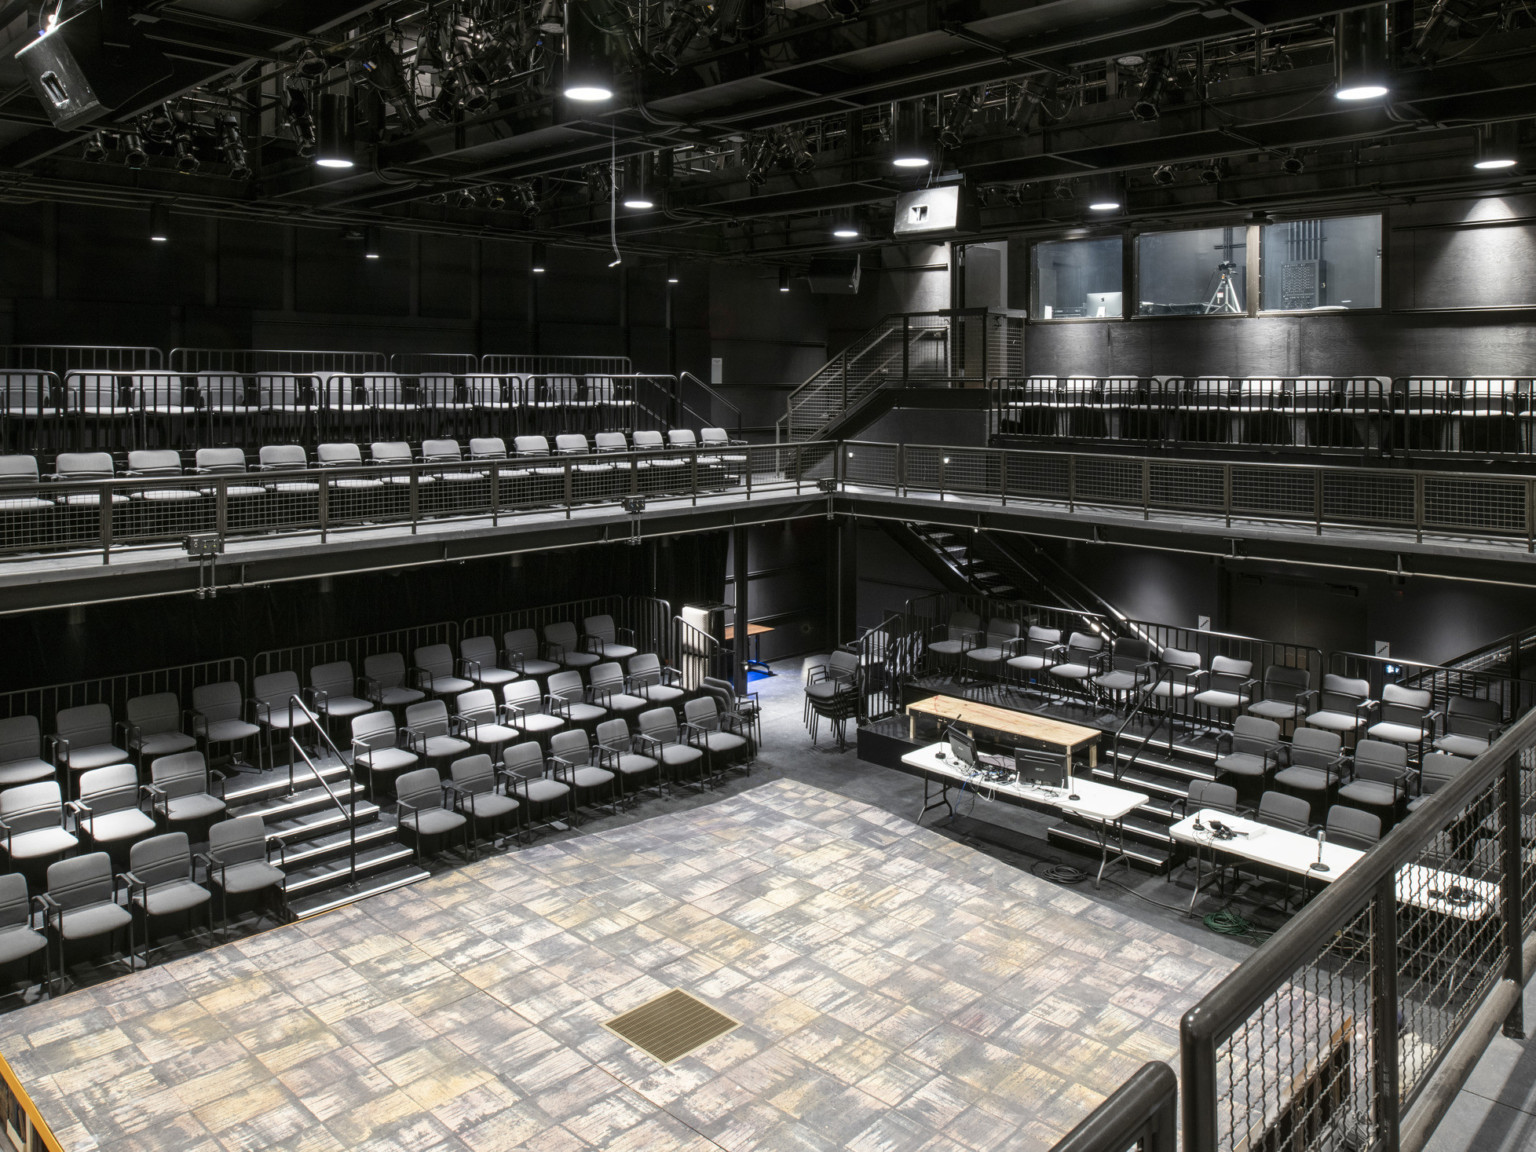 Black box theater with second floor balcony seating, lighting fixtures hang from above. Behind balcony is a room with windows